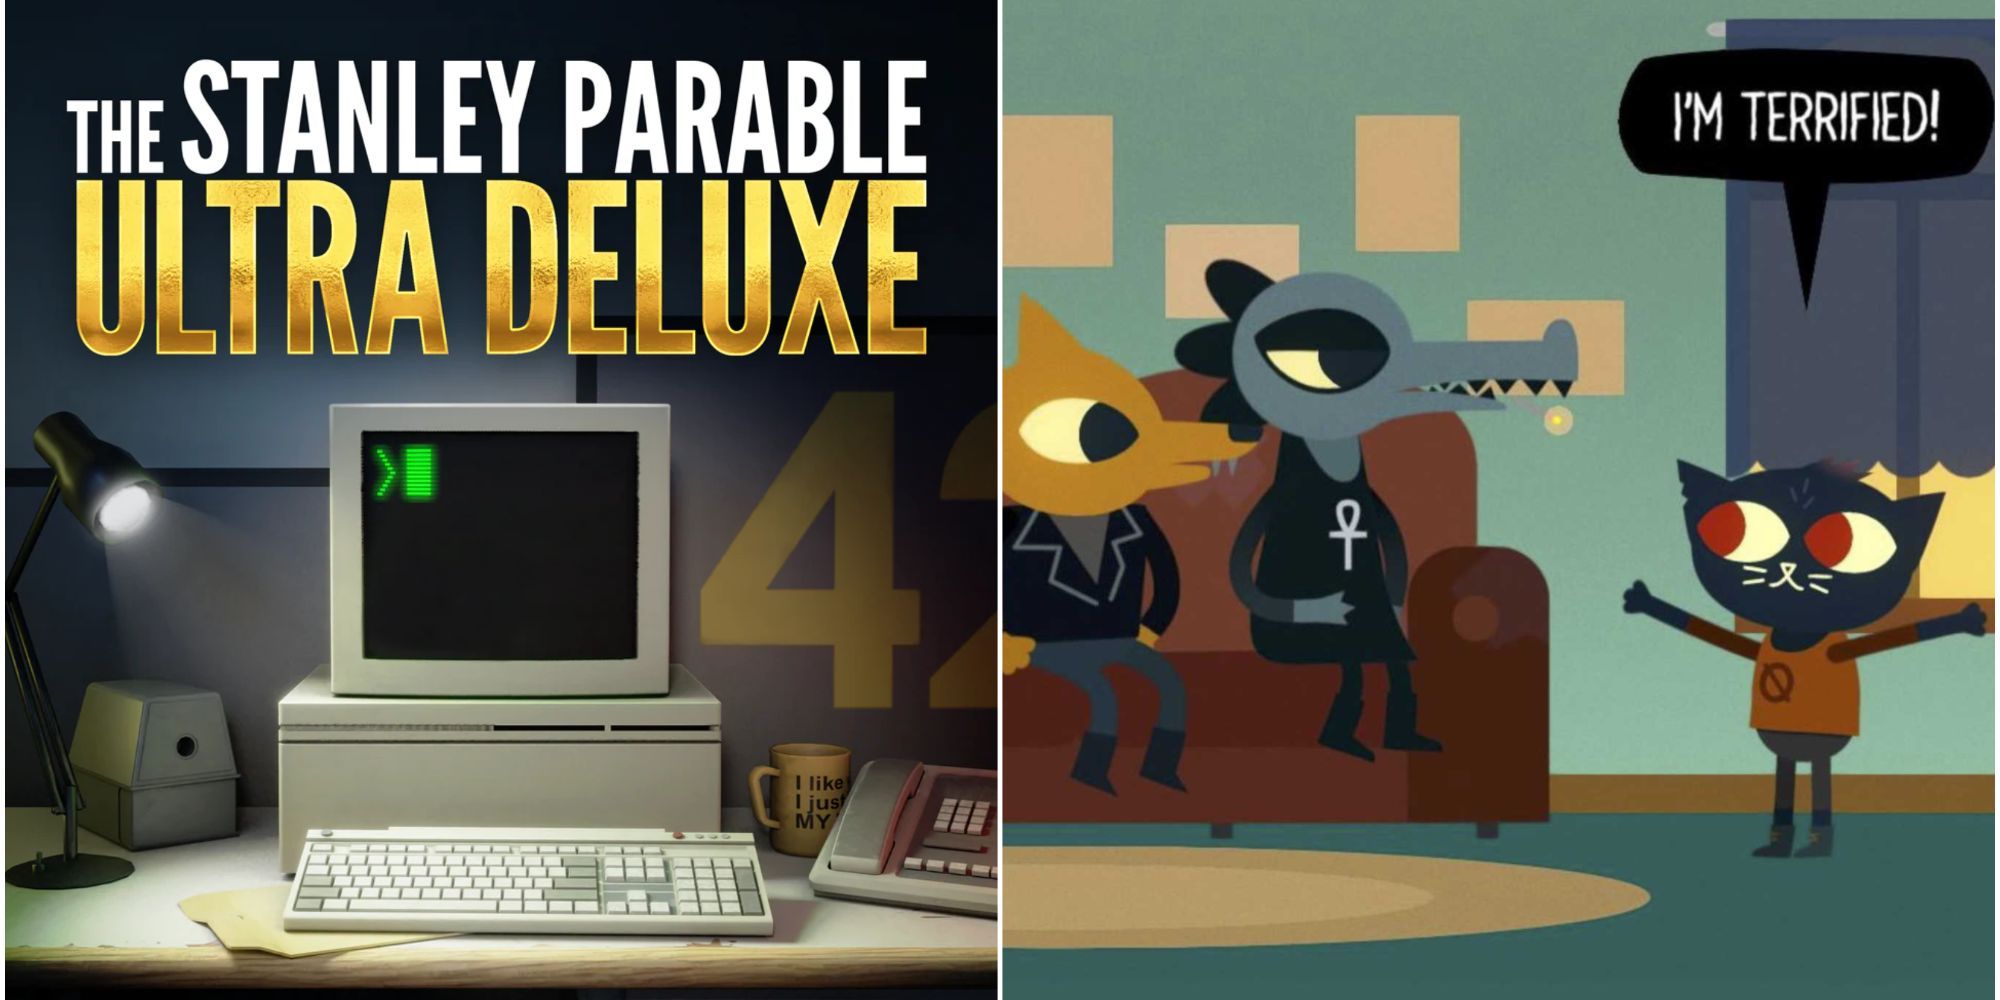 The Stanley Parable Ultra Deluxe cover, with an empty old fashioned computer, next to Mae from Night In The Woods exclaiming 'i'm terrified'